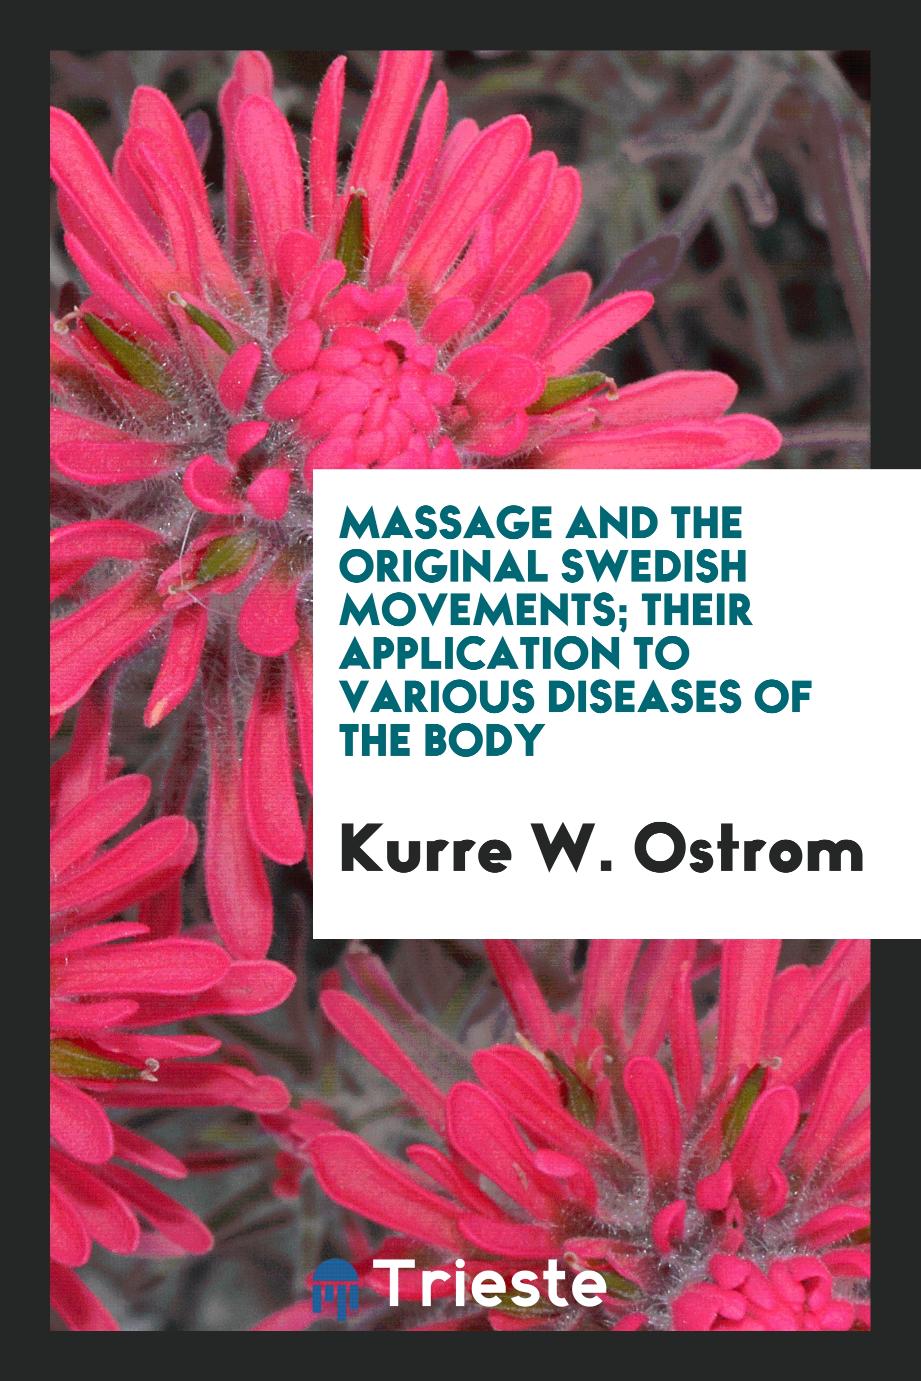 Massage and the original Swedish movements; their application to various diseases of the body